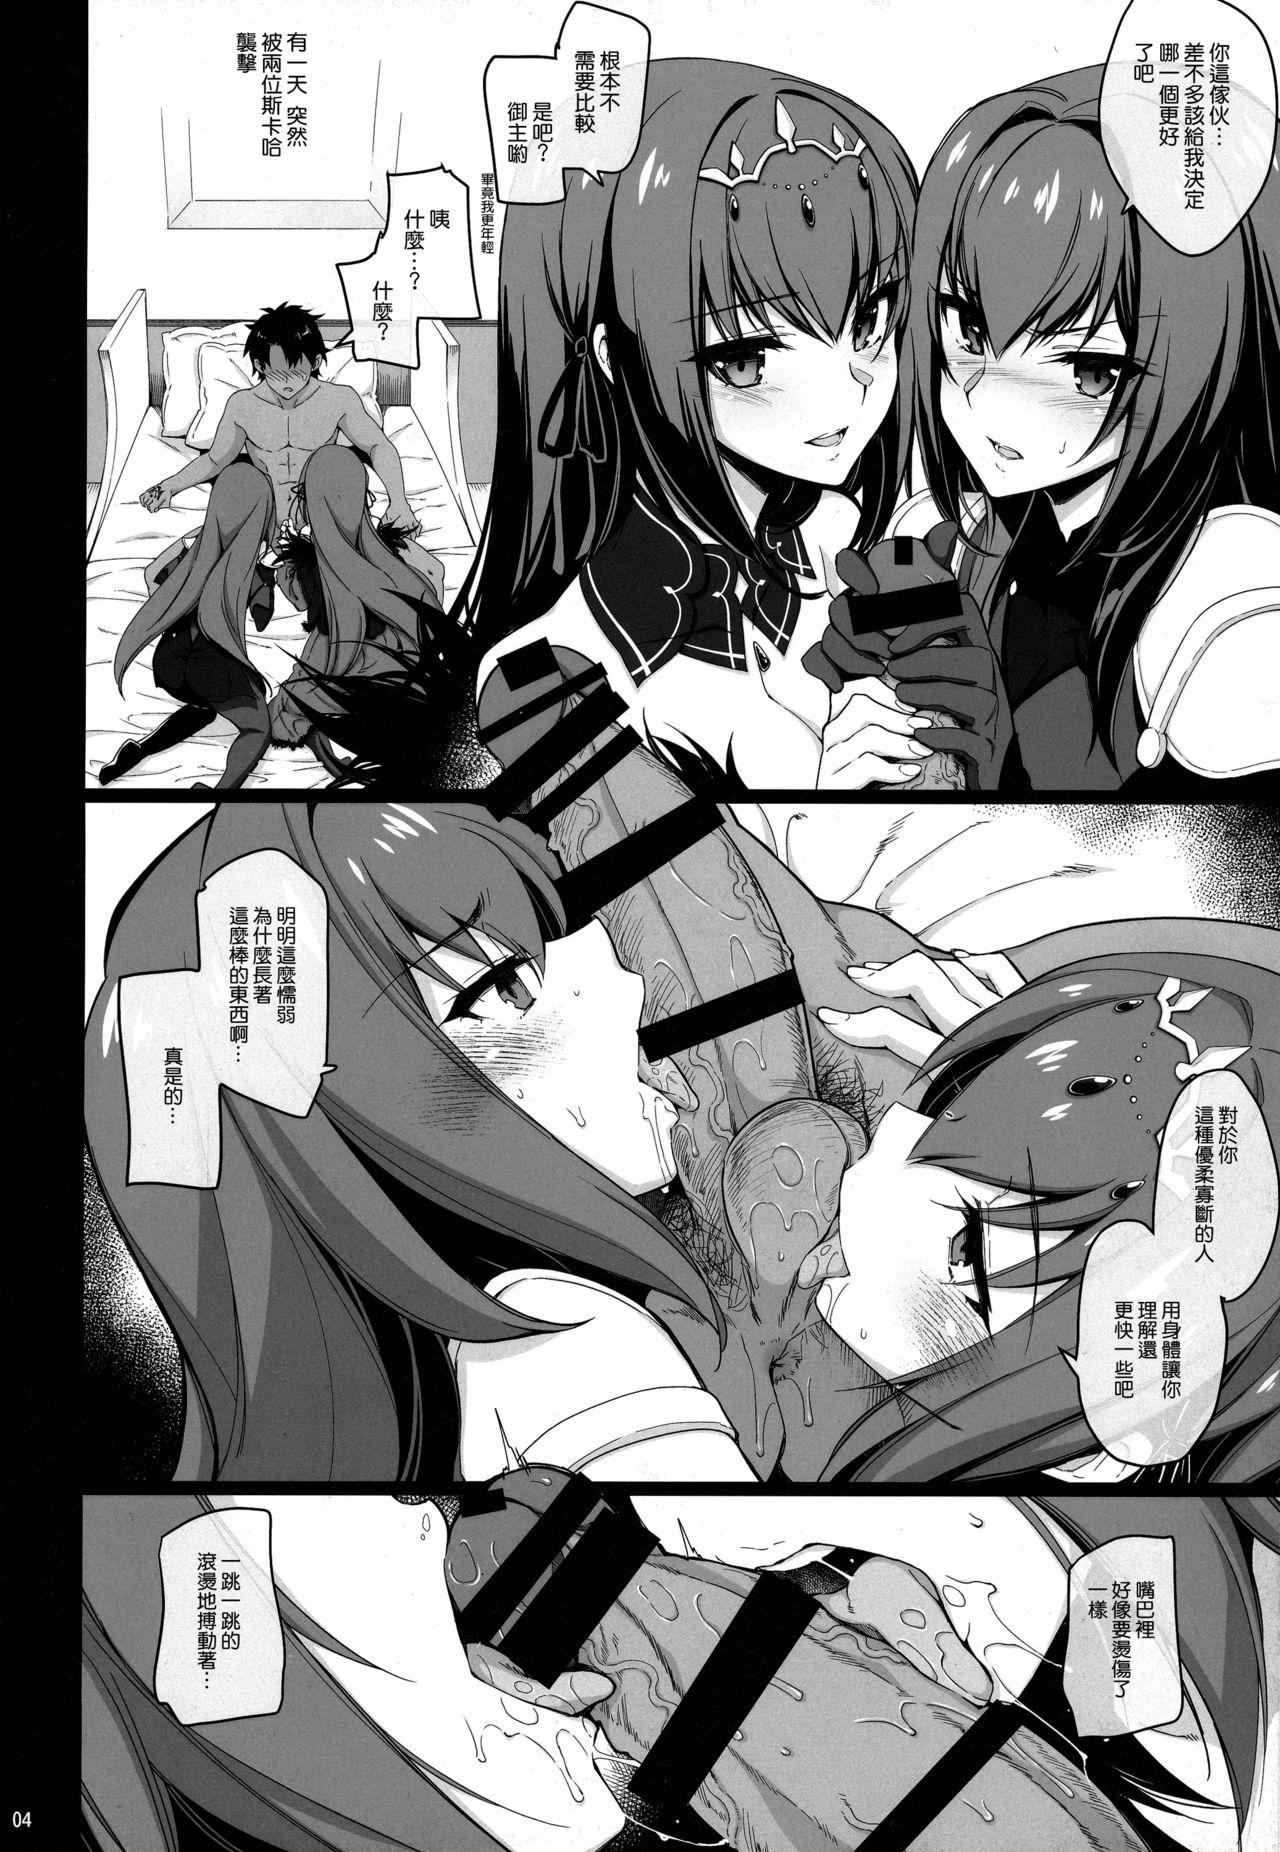 Hunk Dochira no Scathach Show - Fate grand order 1080p - Page 4